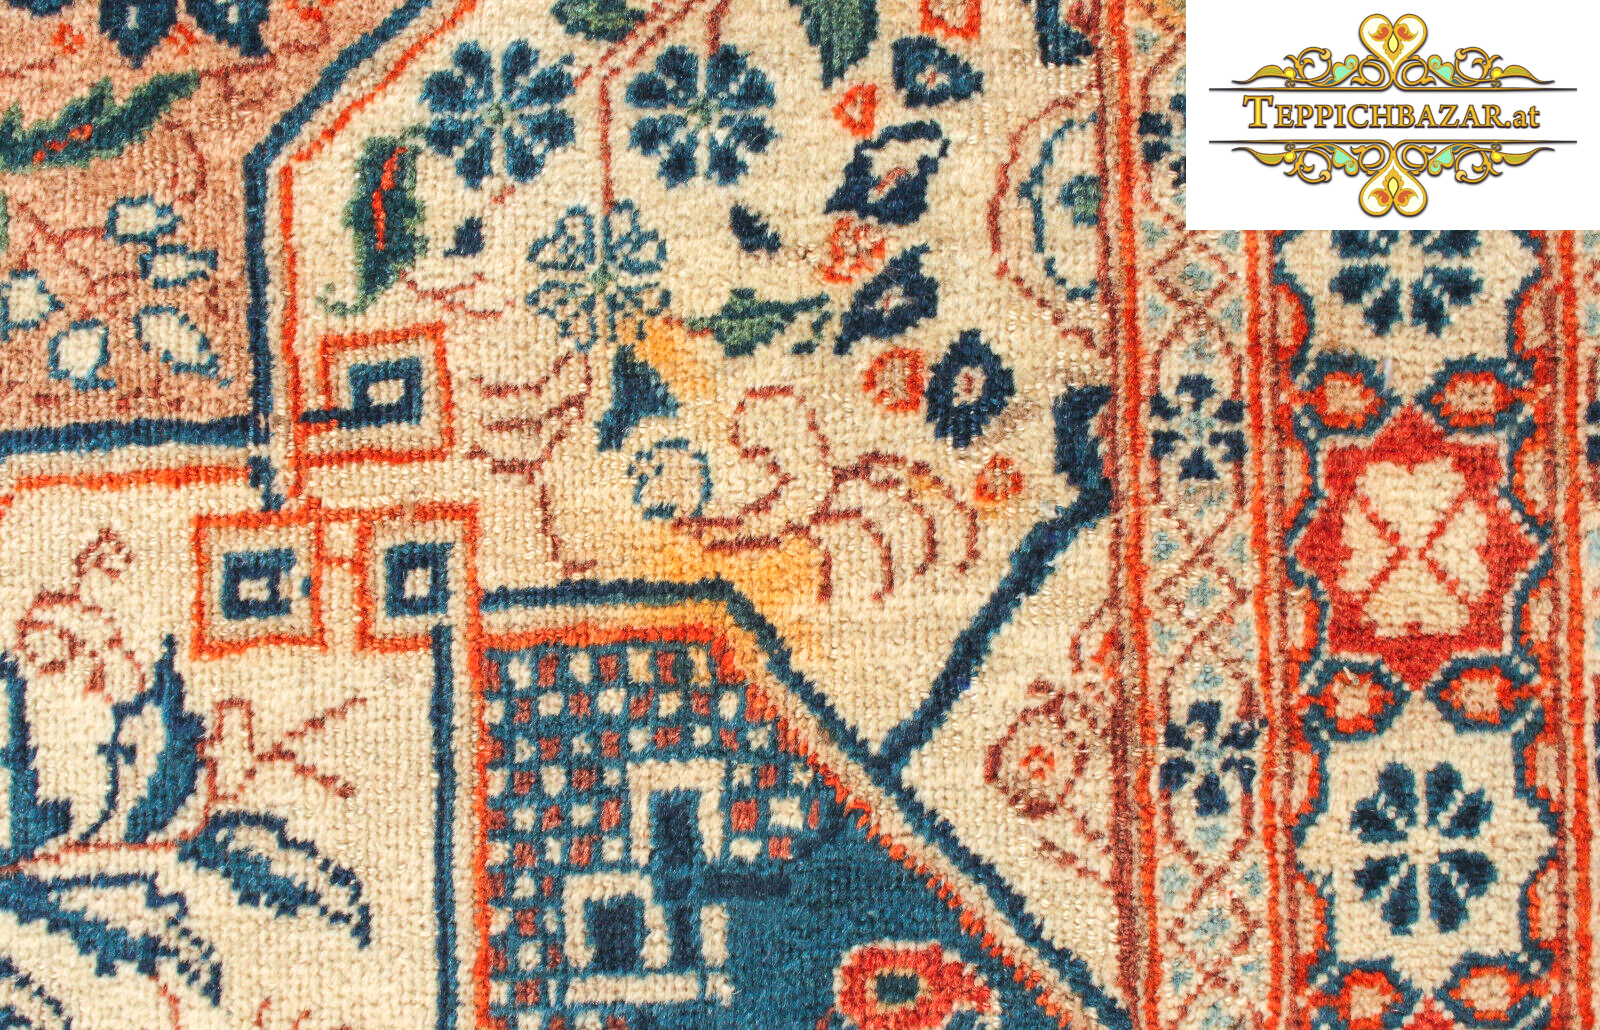 (#H1327) APPROX. 392X297CM HAND-KNOTTED PERSIAN RUG PERSIAN RUG,,WOOL,ORIENTAL RUG,CARPET BAZAR,CARPET,RUGS,PATTERNS,BRICKLER,ORIENTAL RUG TYPE: PERSIAN RUG WITH SIGNATURE PILE: 100% WOOL WITHOUT ADDITIONS WARP: 100% COTTON SIZE: 392 297X160.000CM NODE COUNT: APPROX. XNUMX KNOTS PER M² CONDITION: VERY GOOD WITH PATINA PERSIAN CARPET ORIENTAL CARPET